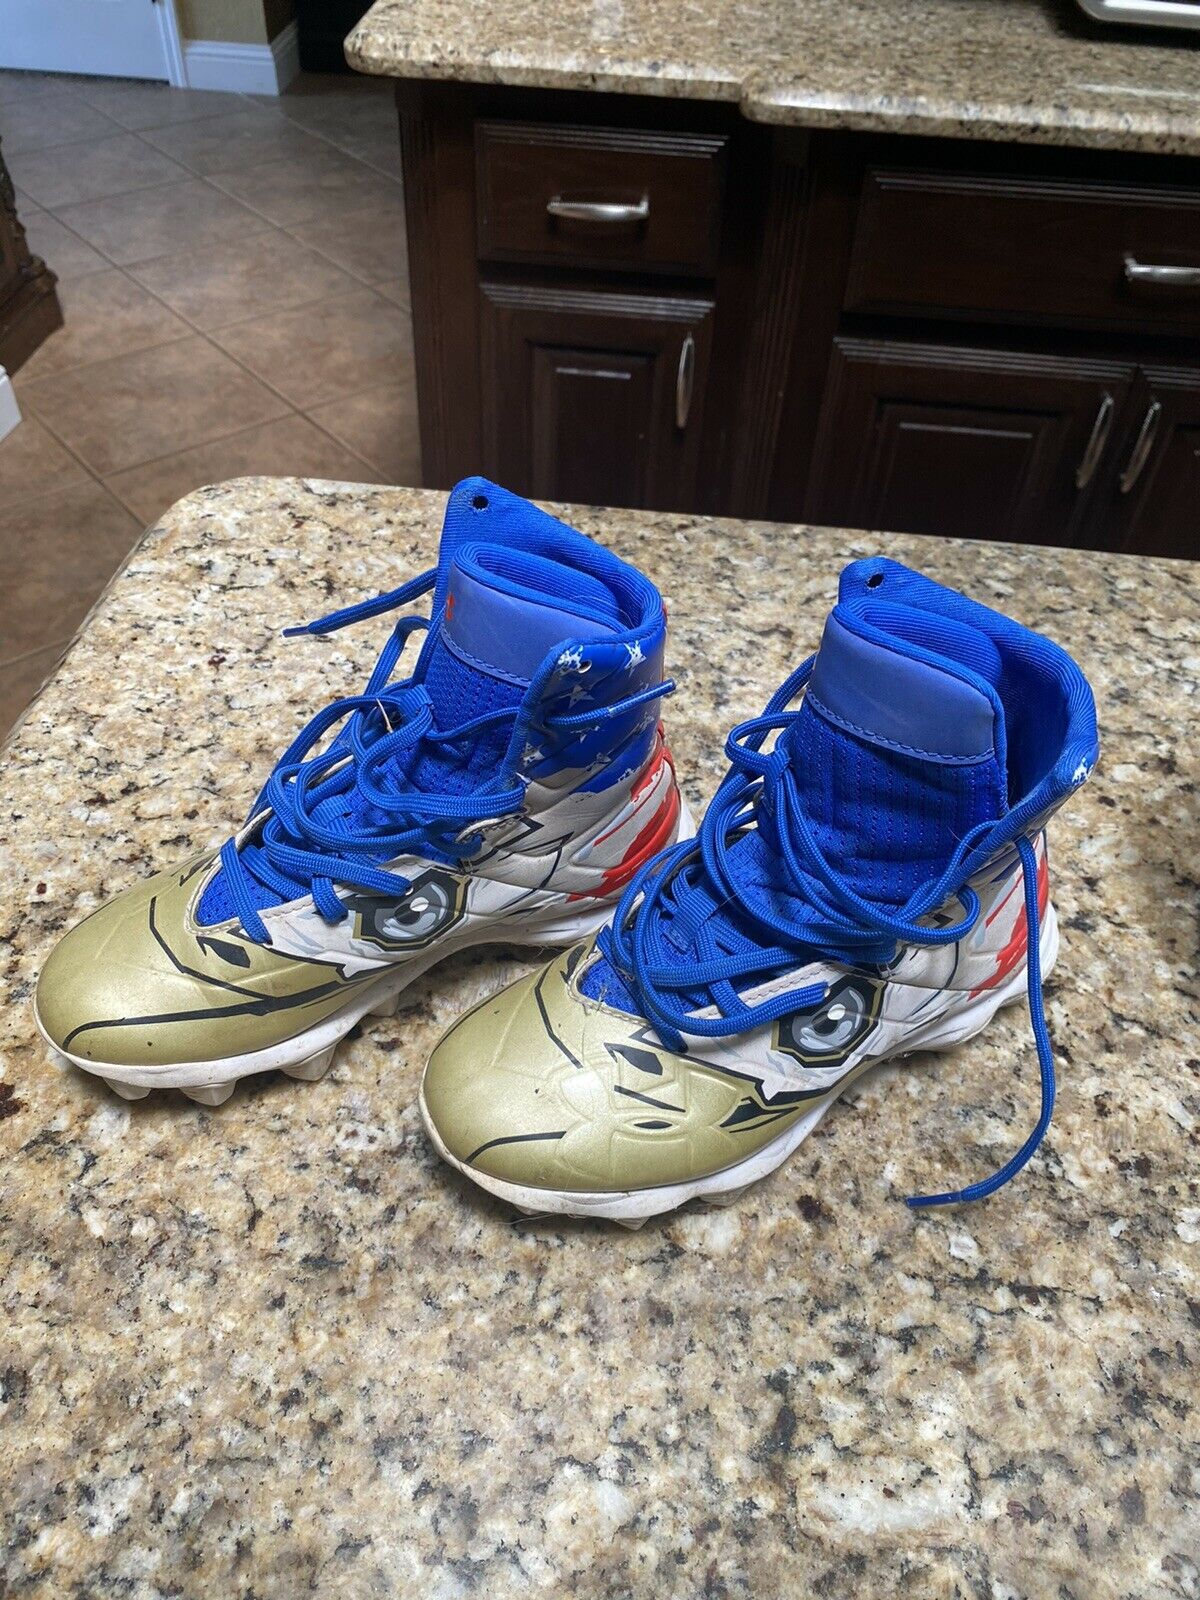 Youth Football Cleats